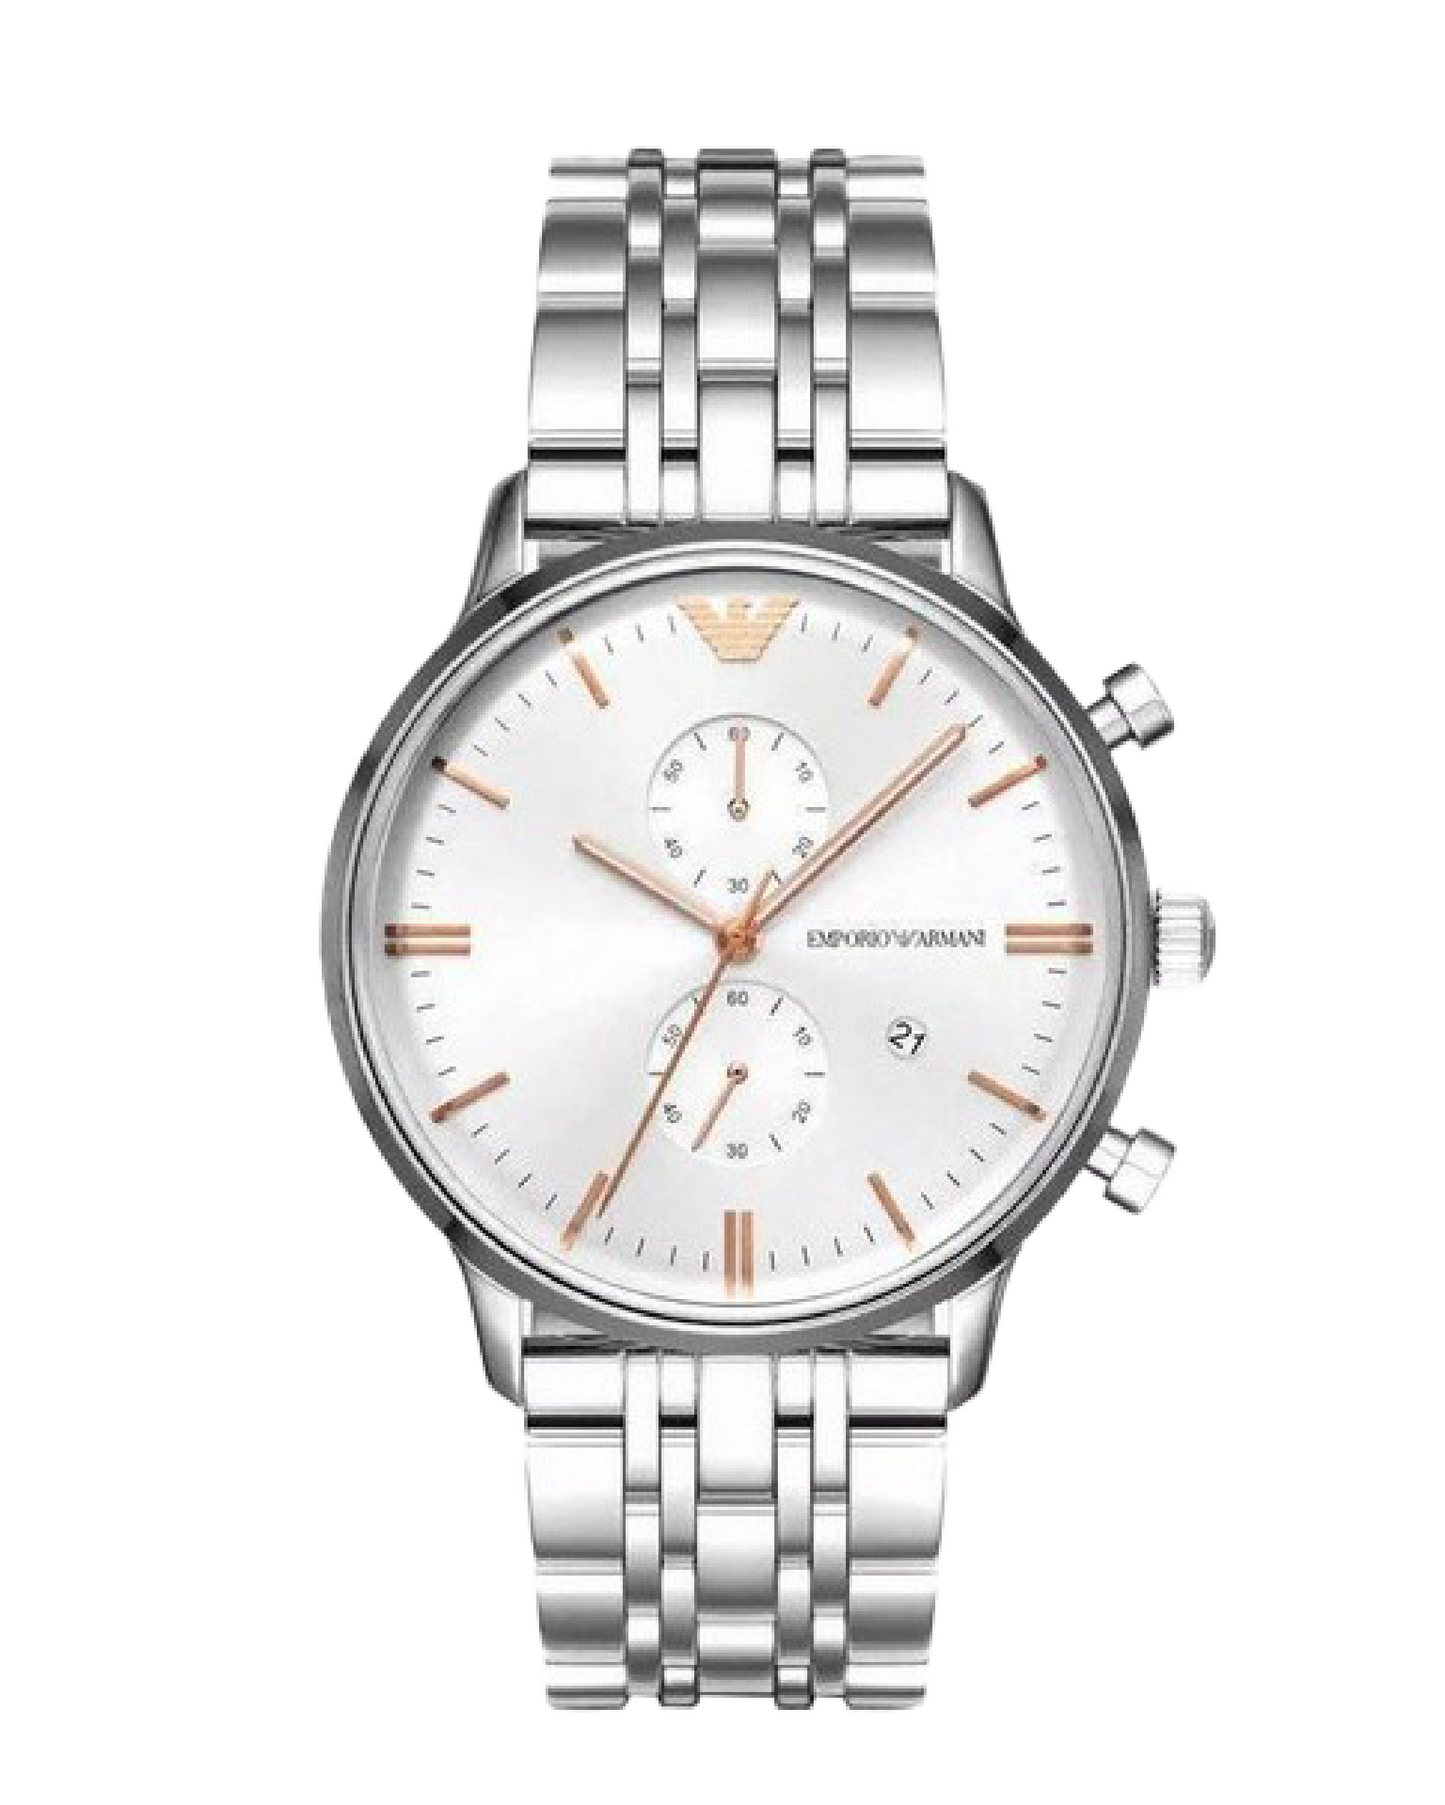 Emporio Armani: Timeless Elegance in Stainless Stee